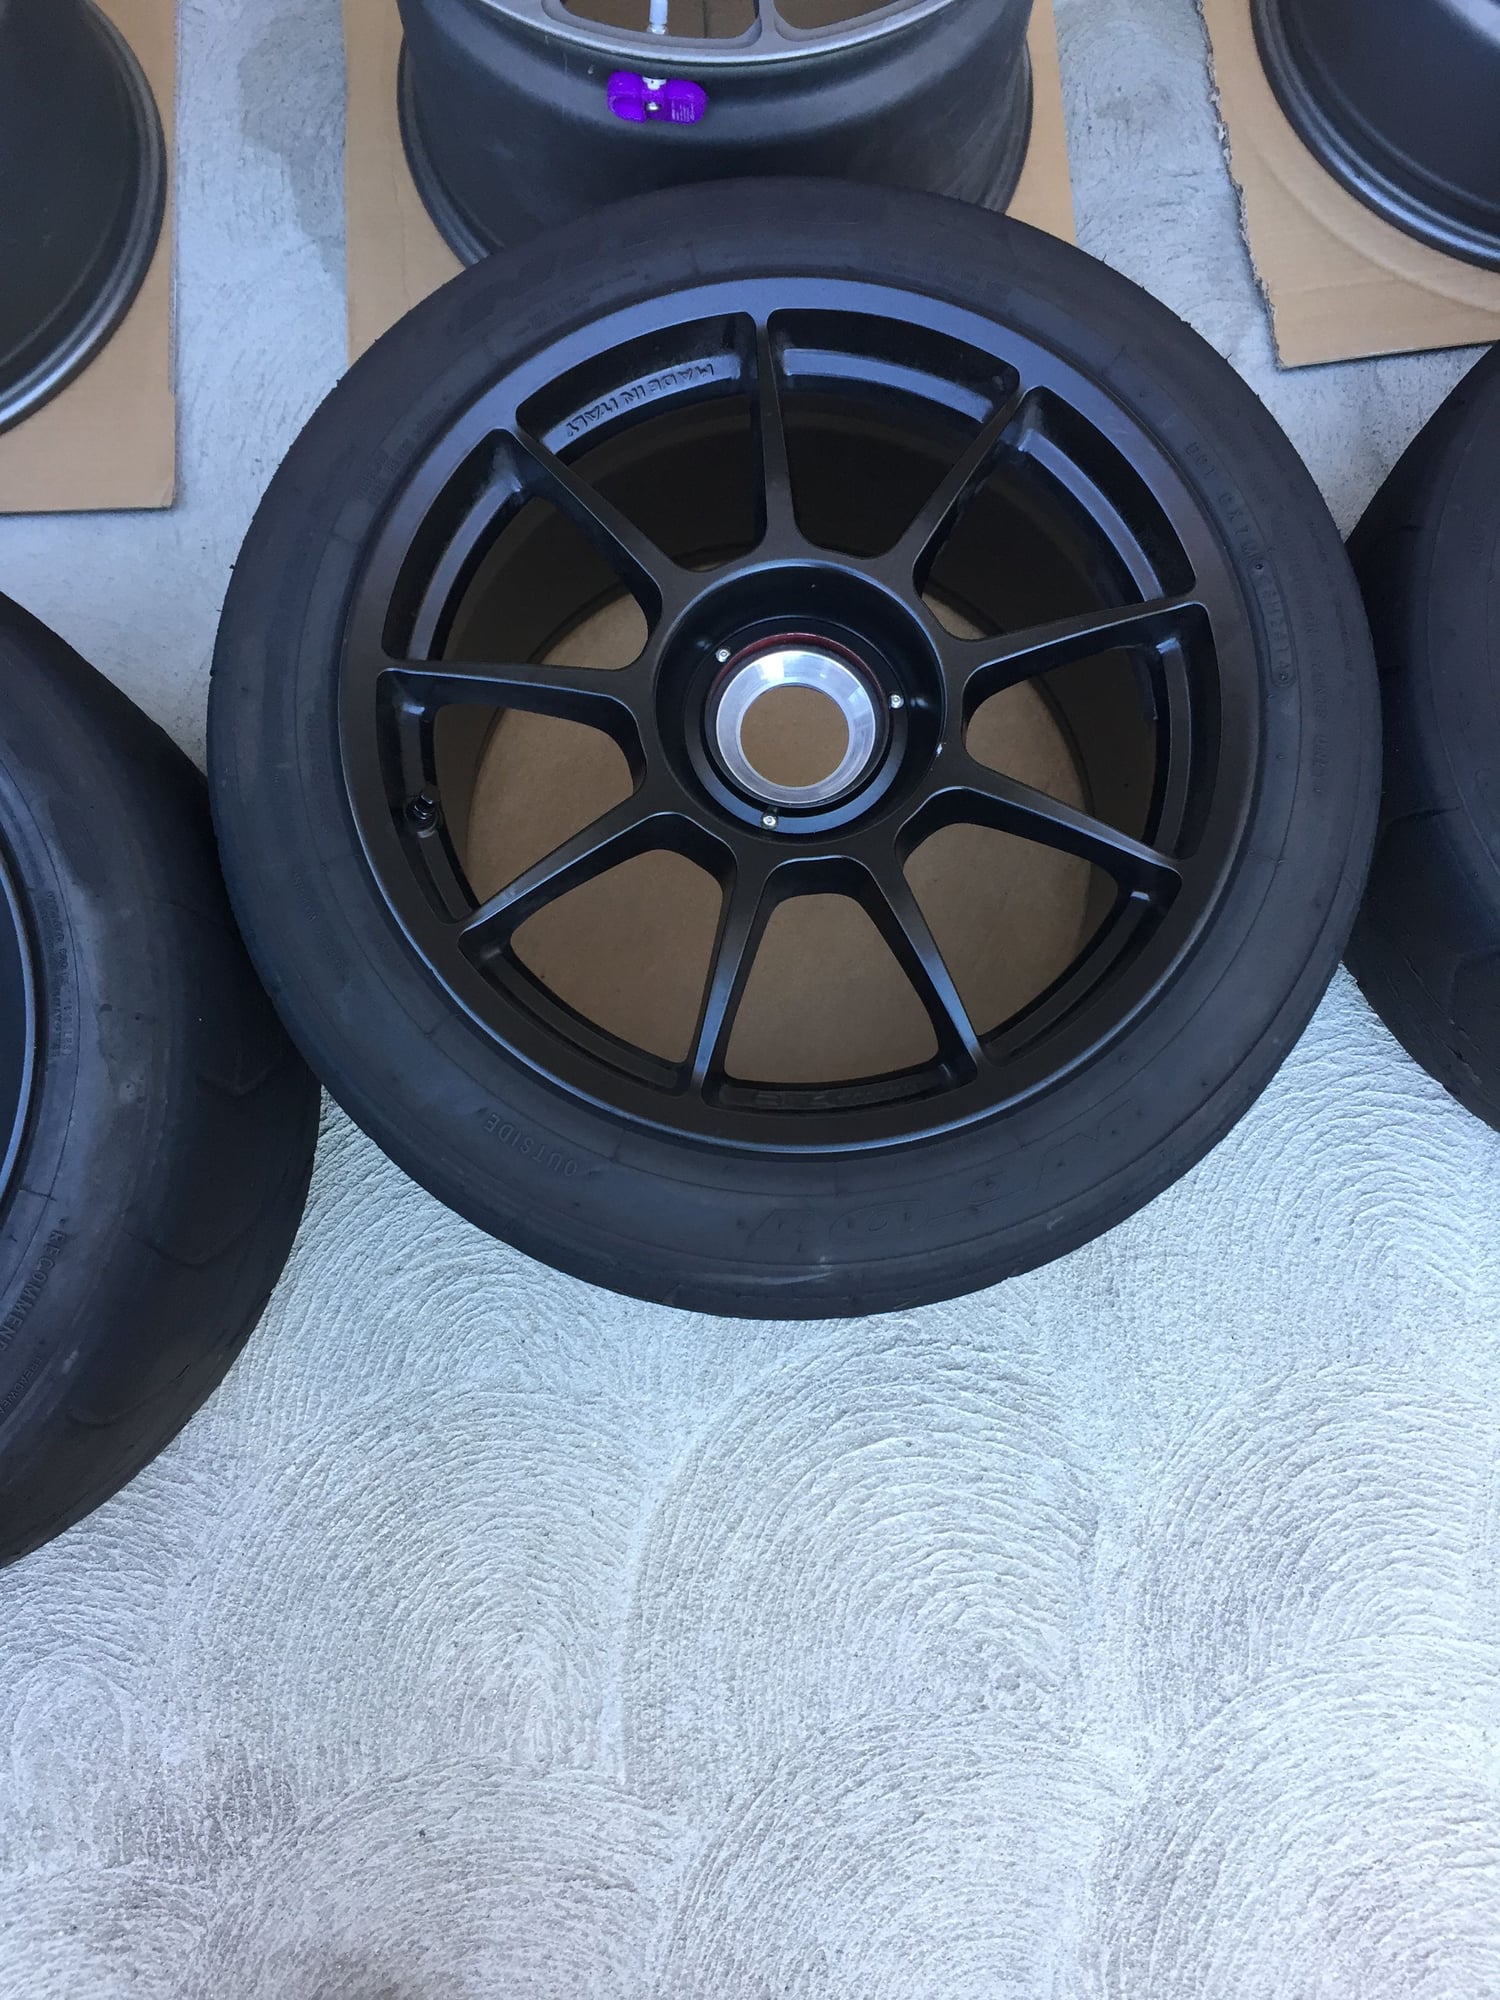 Wheels and Tires/Axles - FS: OZ Challenge center lock track wheels for NB 997.2 GT3 - Used - 2010 to 2011 Porsche GT3 - Los Angeles, CA 90402, United States